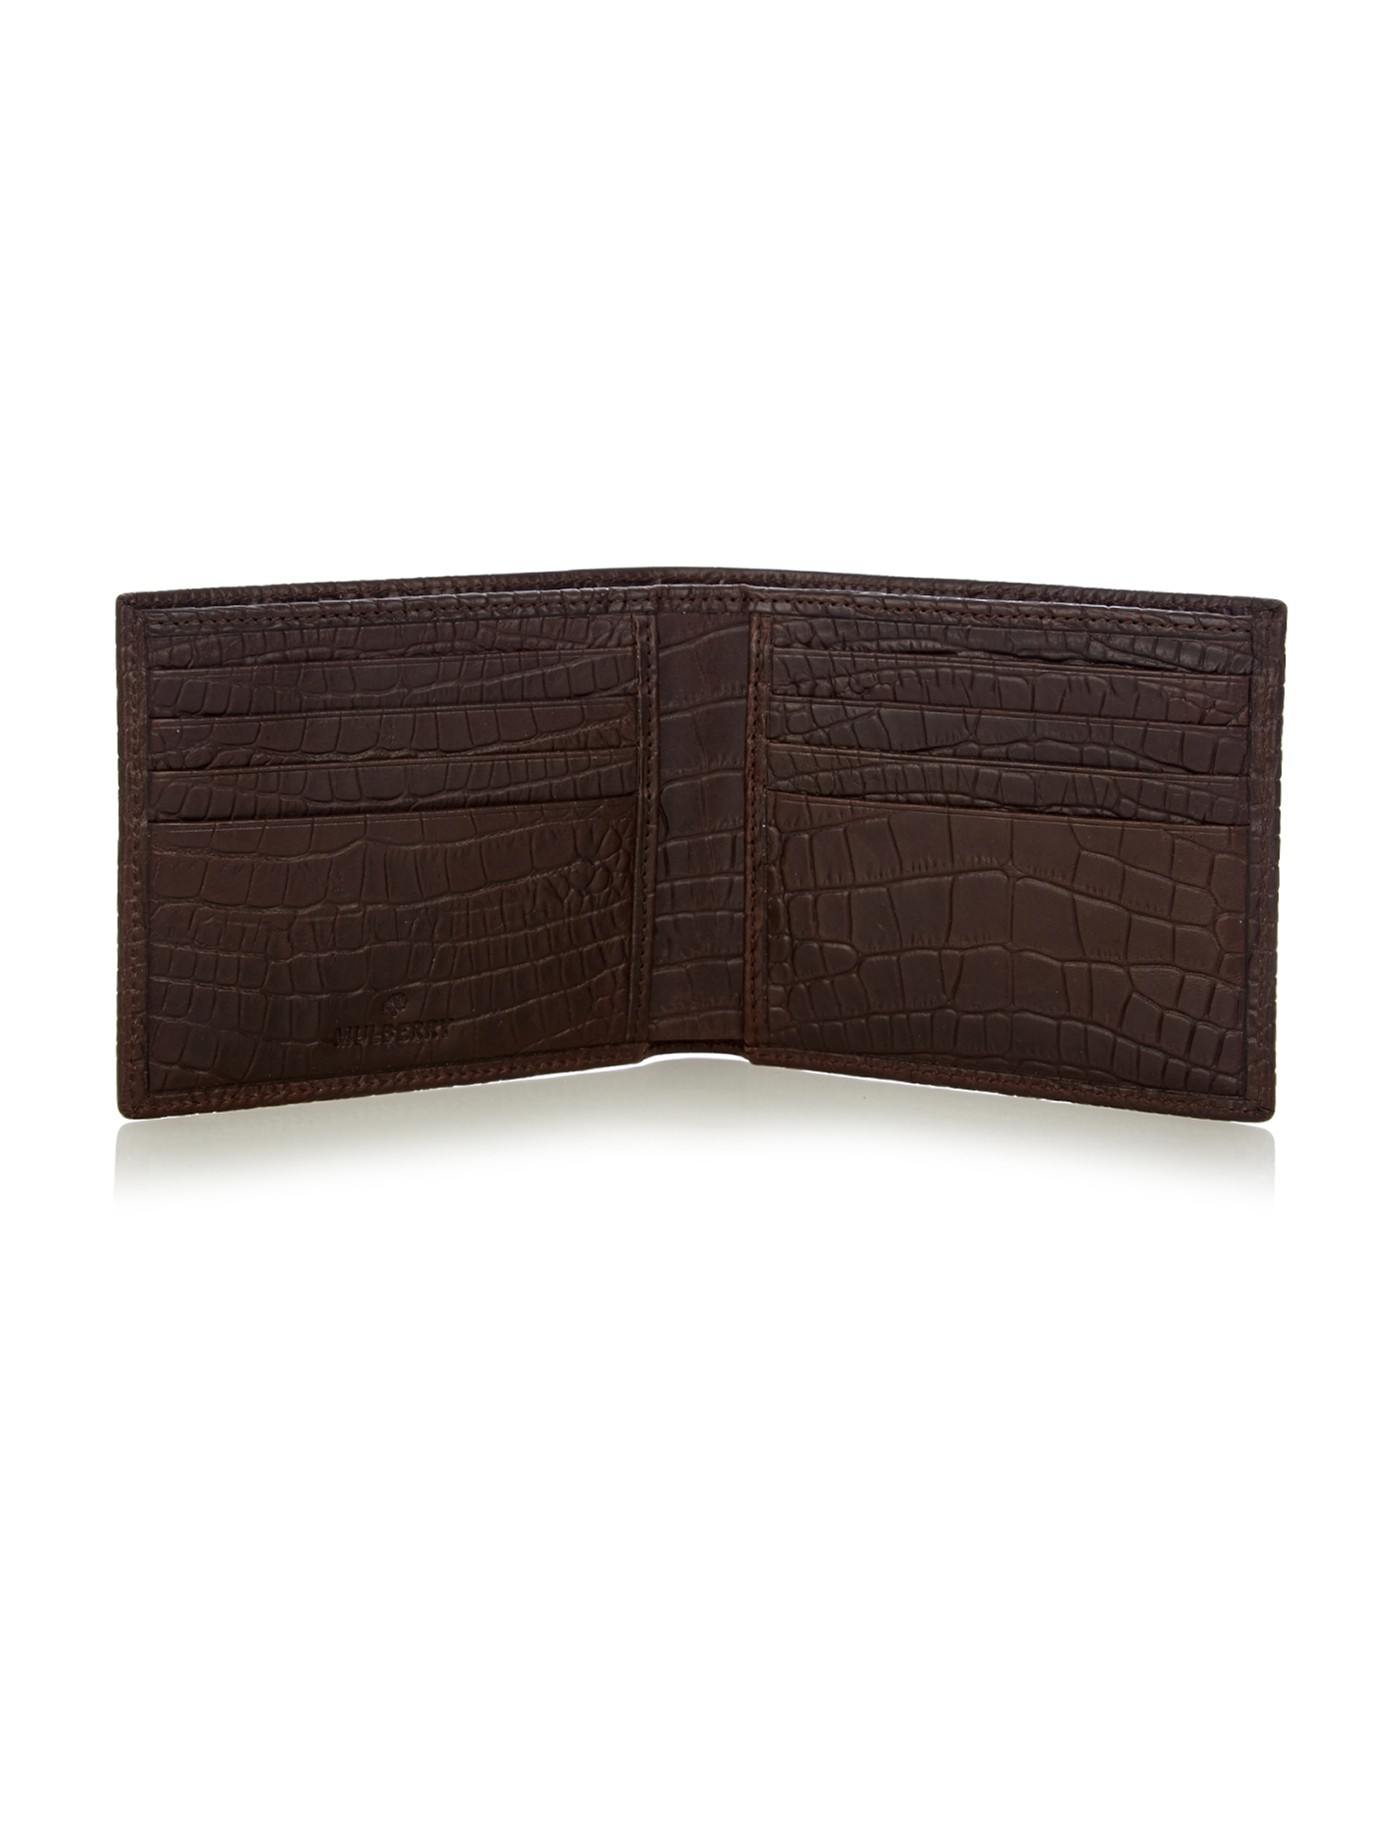 Mulberry Crocodile-Effect Leather Wallet in Brown for Men | Lyst UK